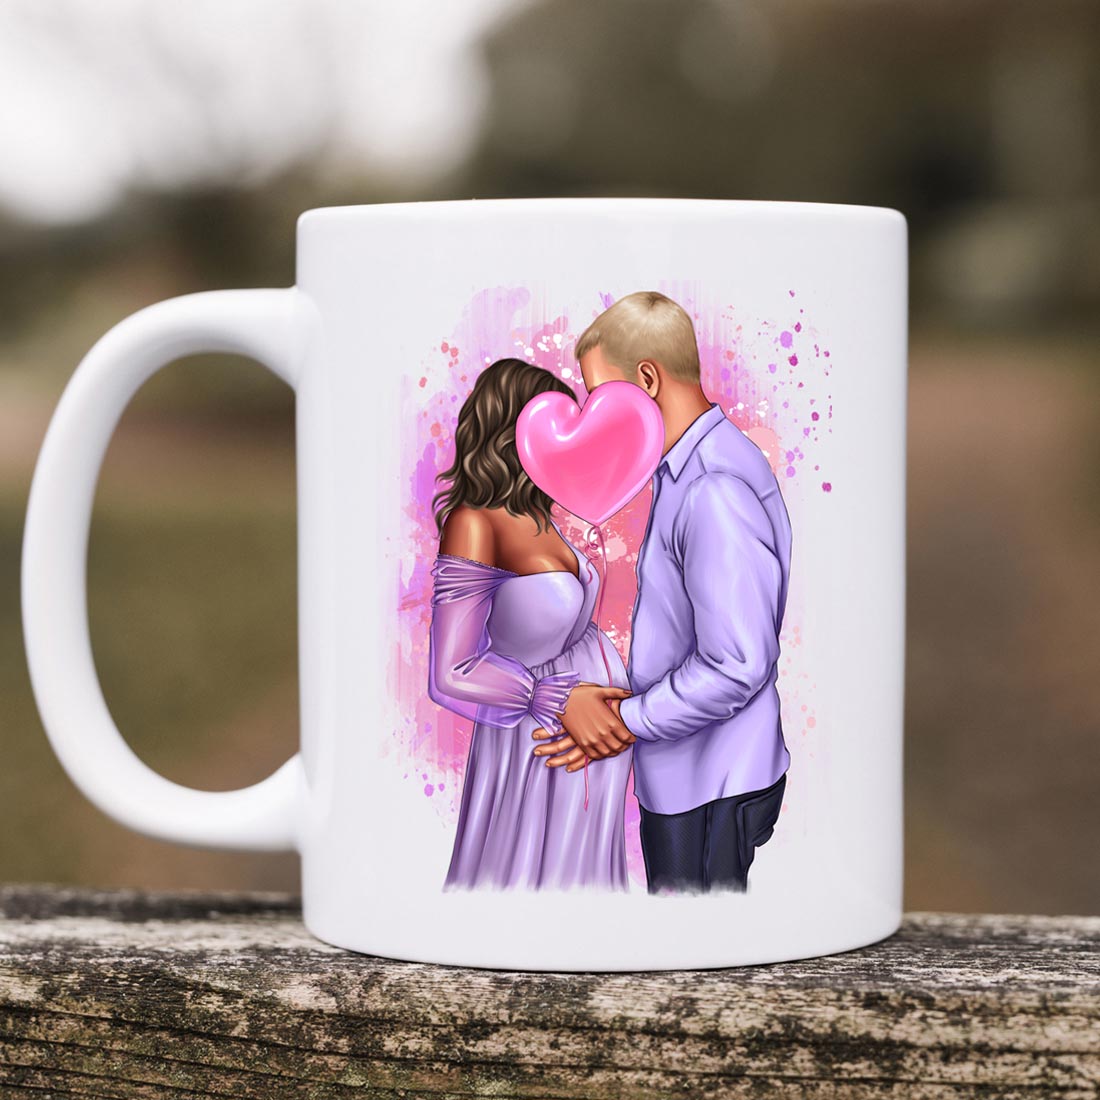 Pregnant Girl Clipart on cup.